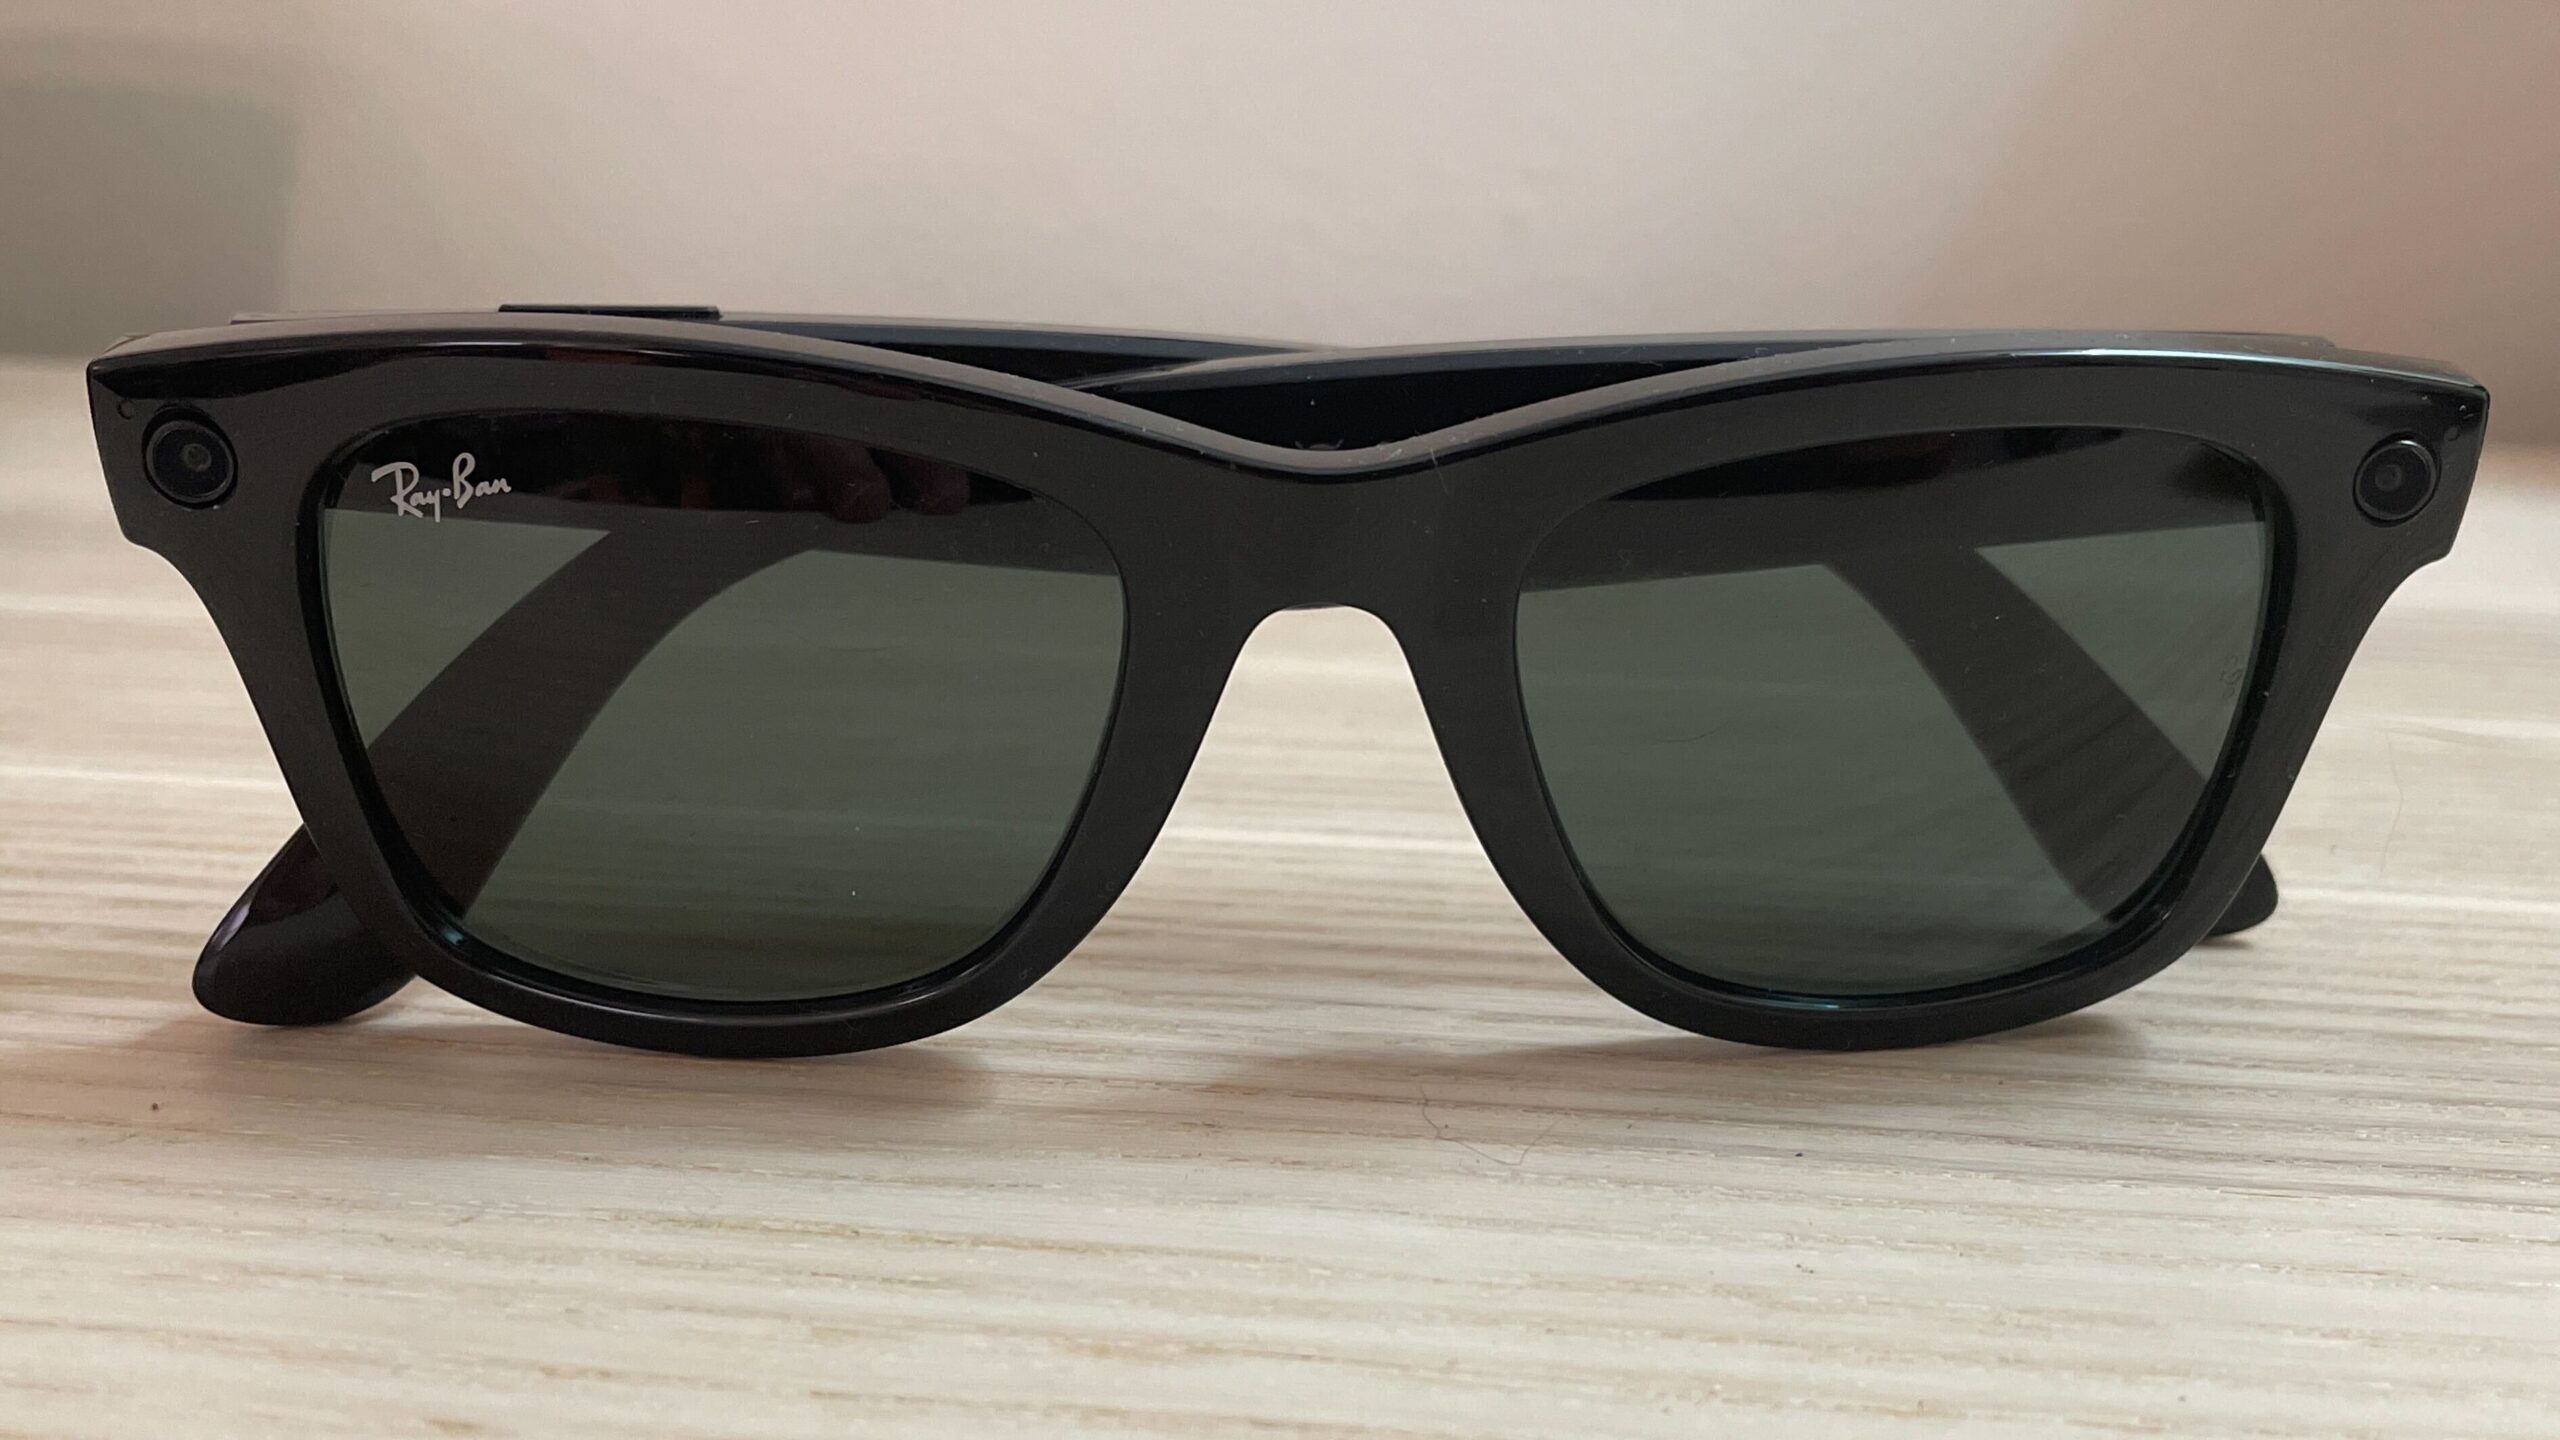 Facebook Frames Ray-Ban sunglasses straight on